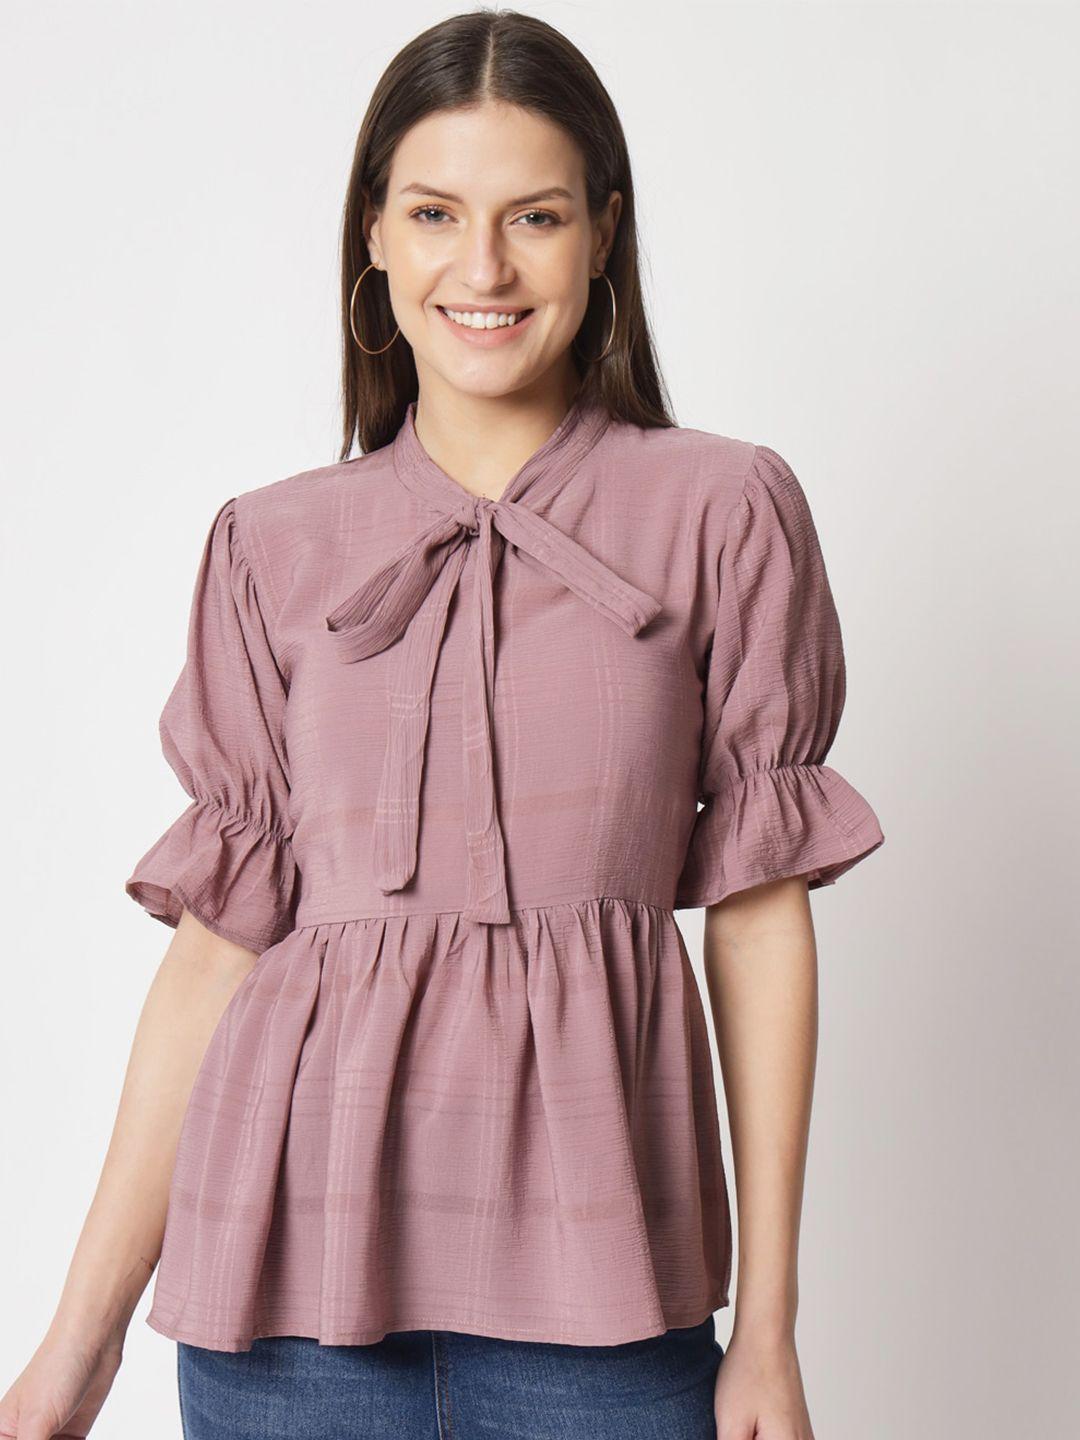 warthy-ent-purple-tie-up-neck-bell-sleeve-cotton-cinched-waist-top